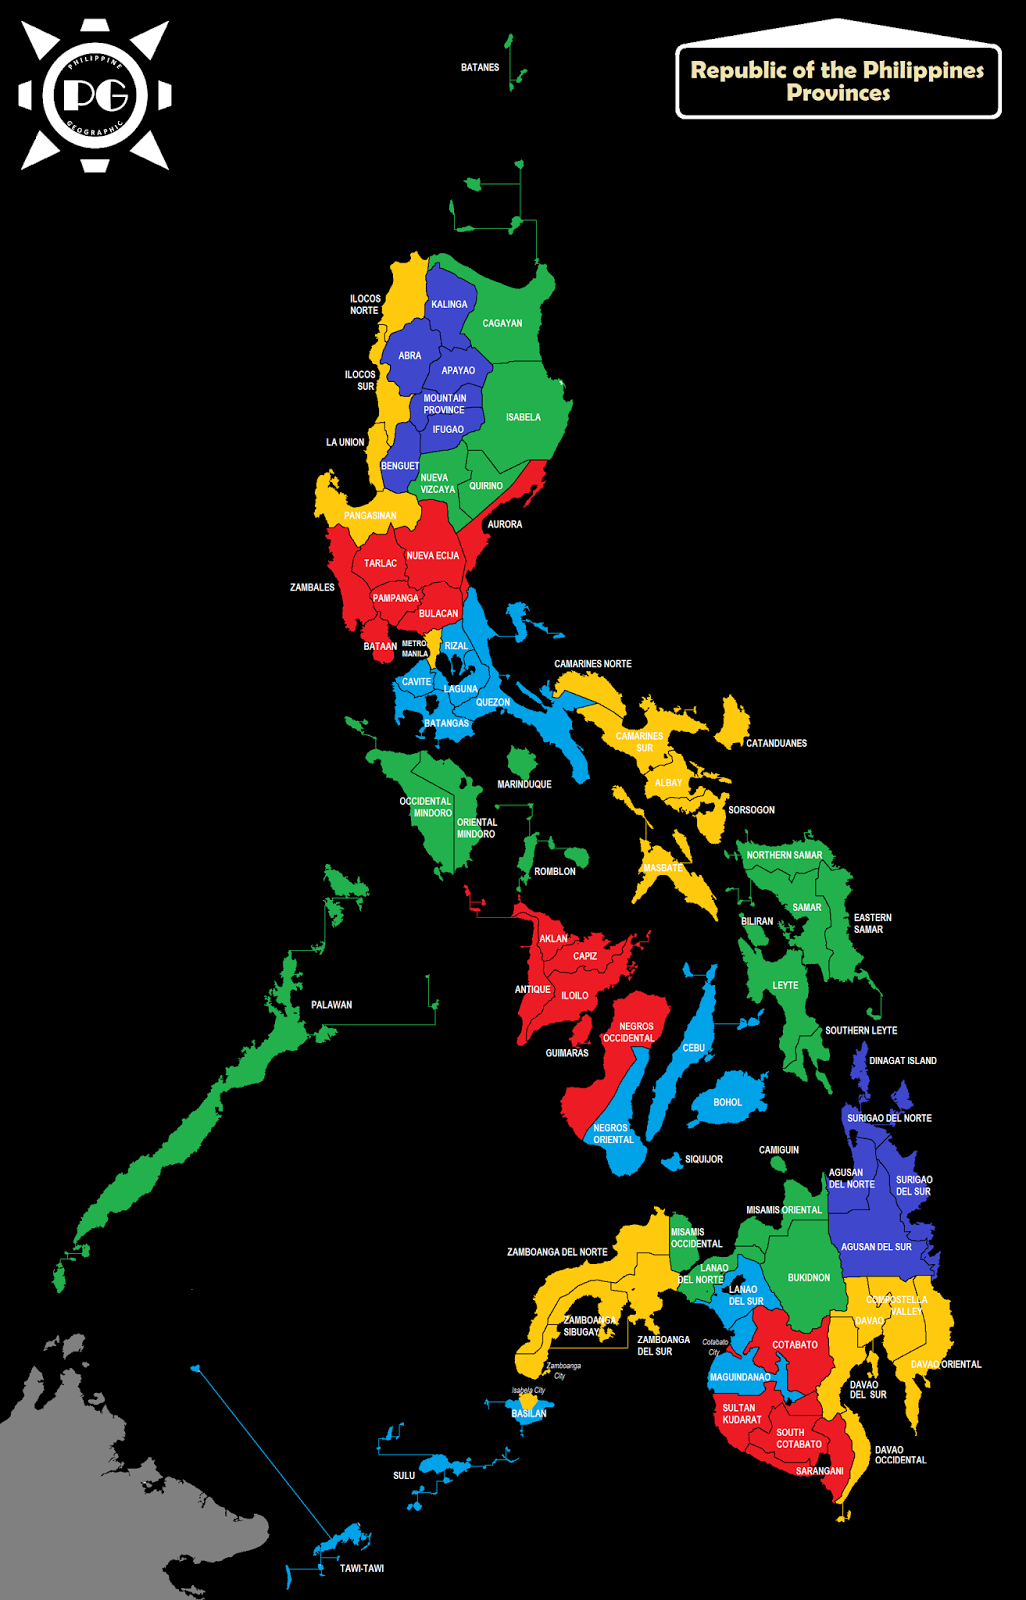 Philippine Geographic: Guide to Philippine Provinces